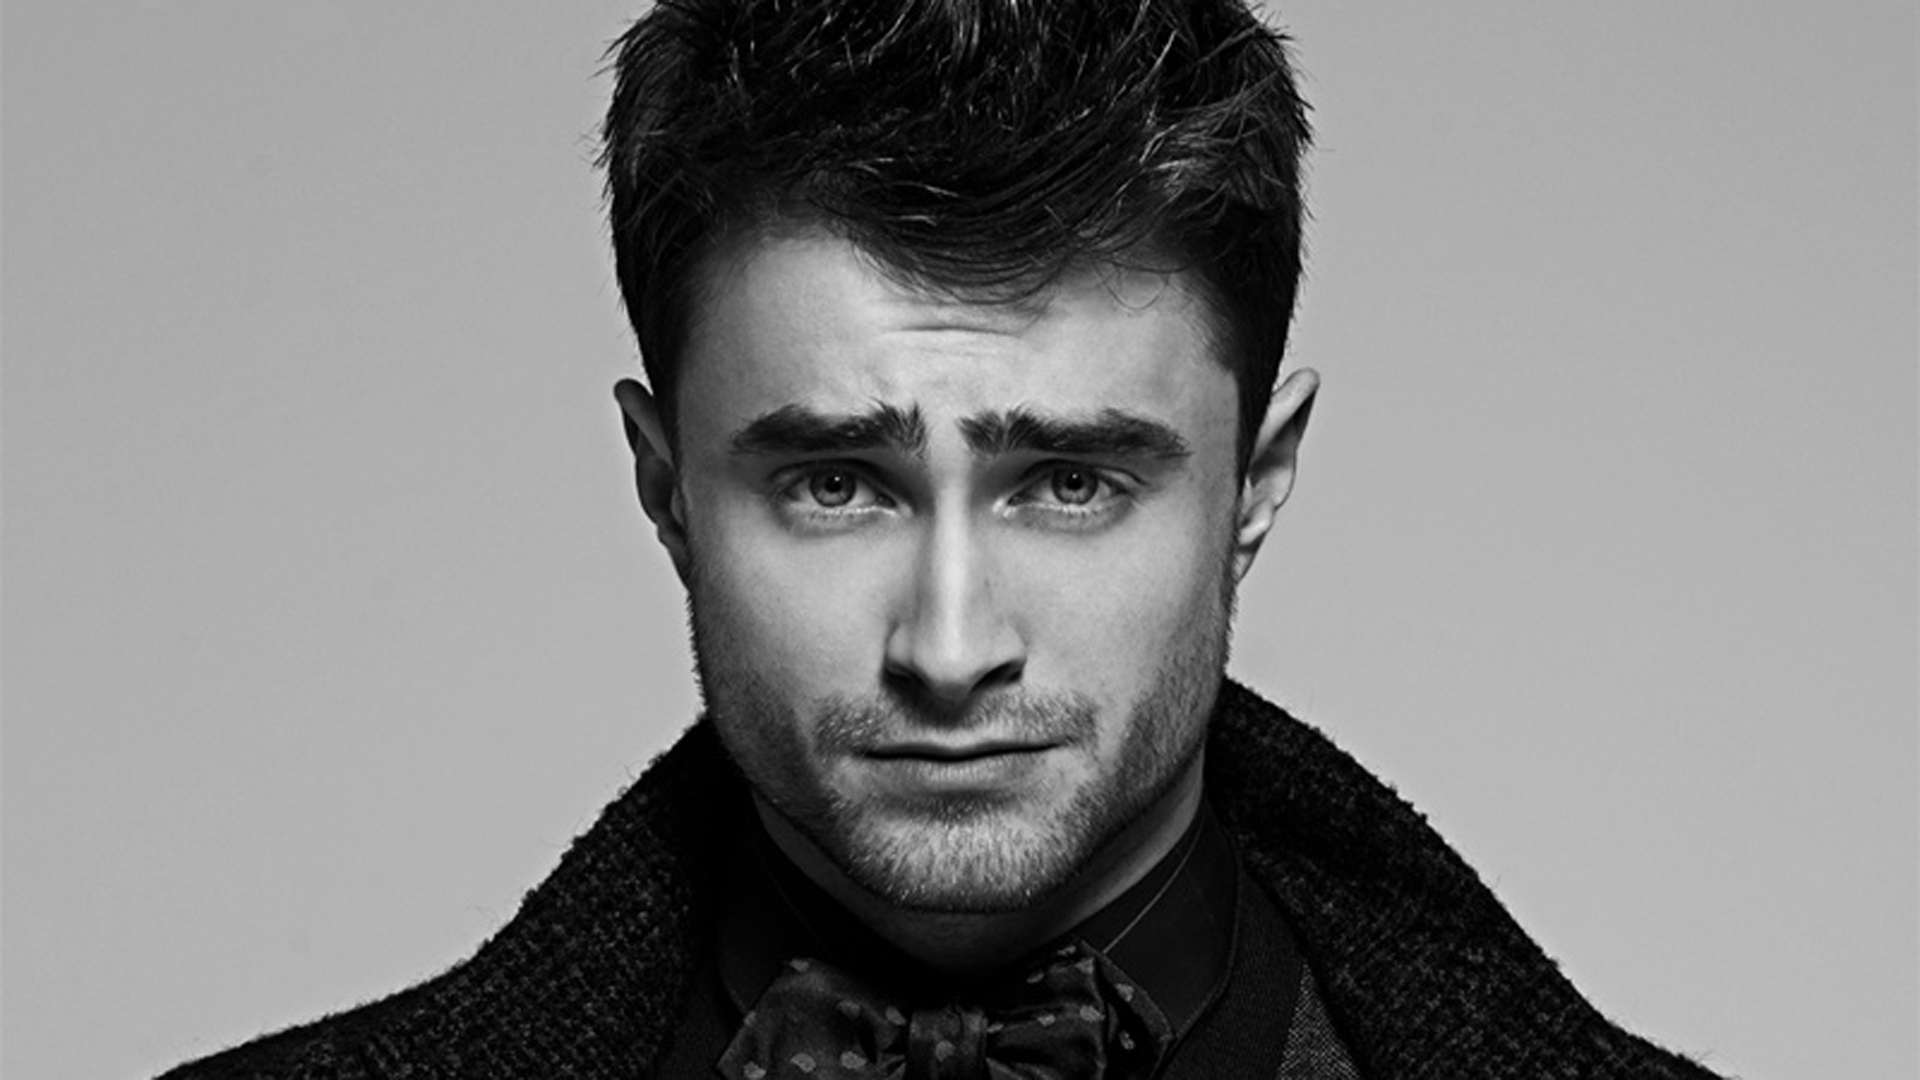 HD Daniel Radcliffe Wallpapers HdCoolWallpapers.Com